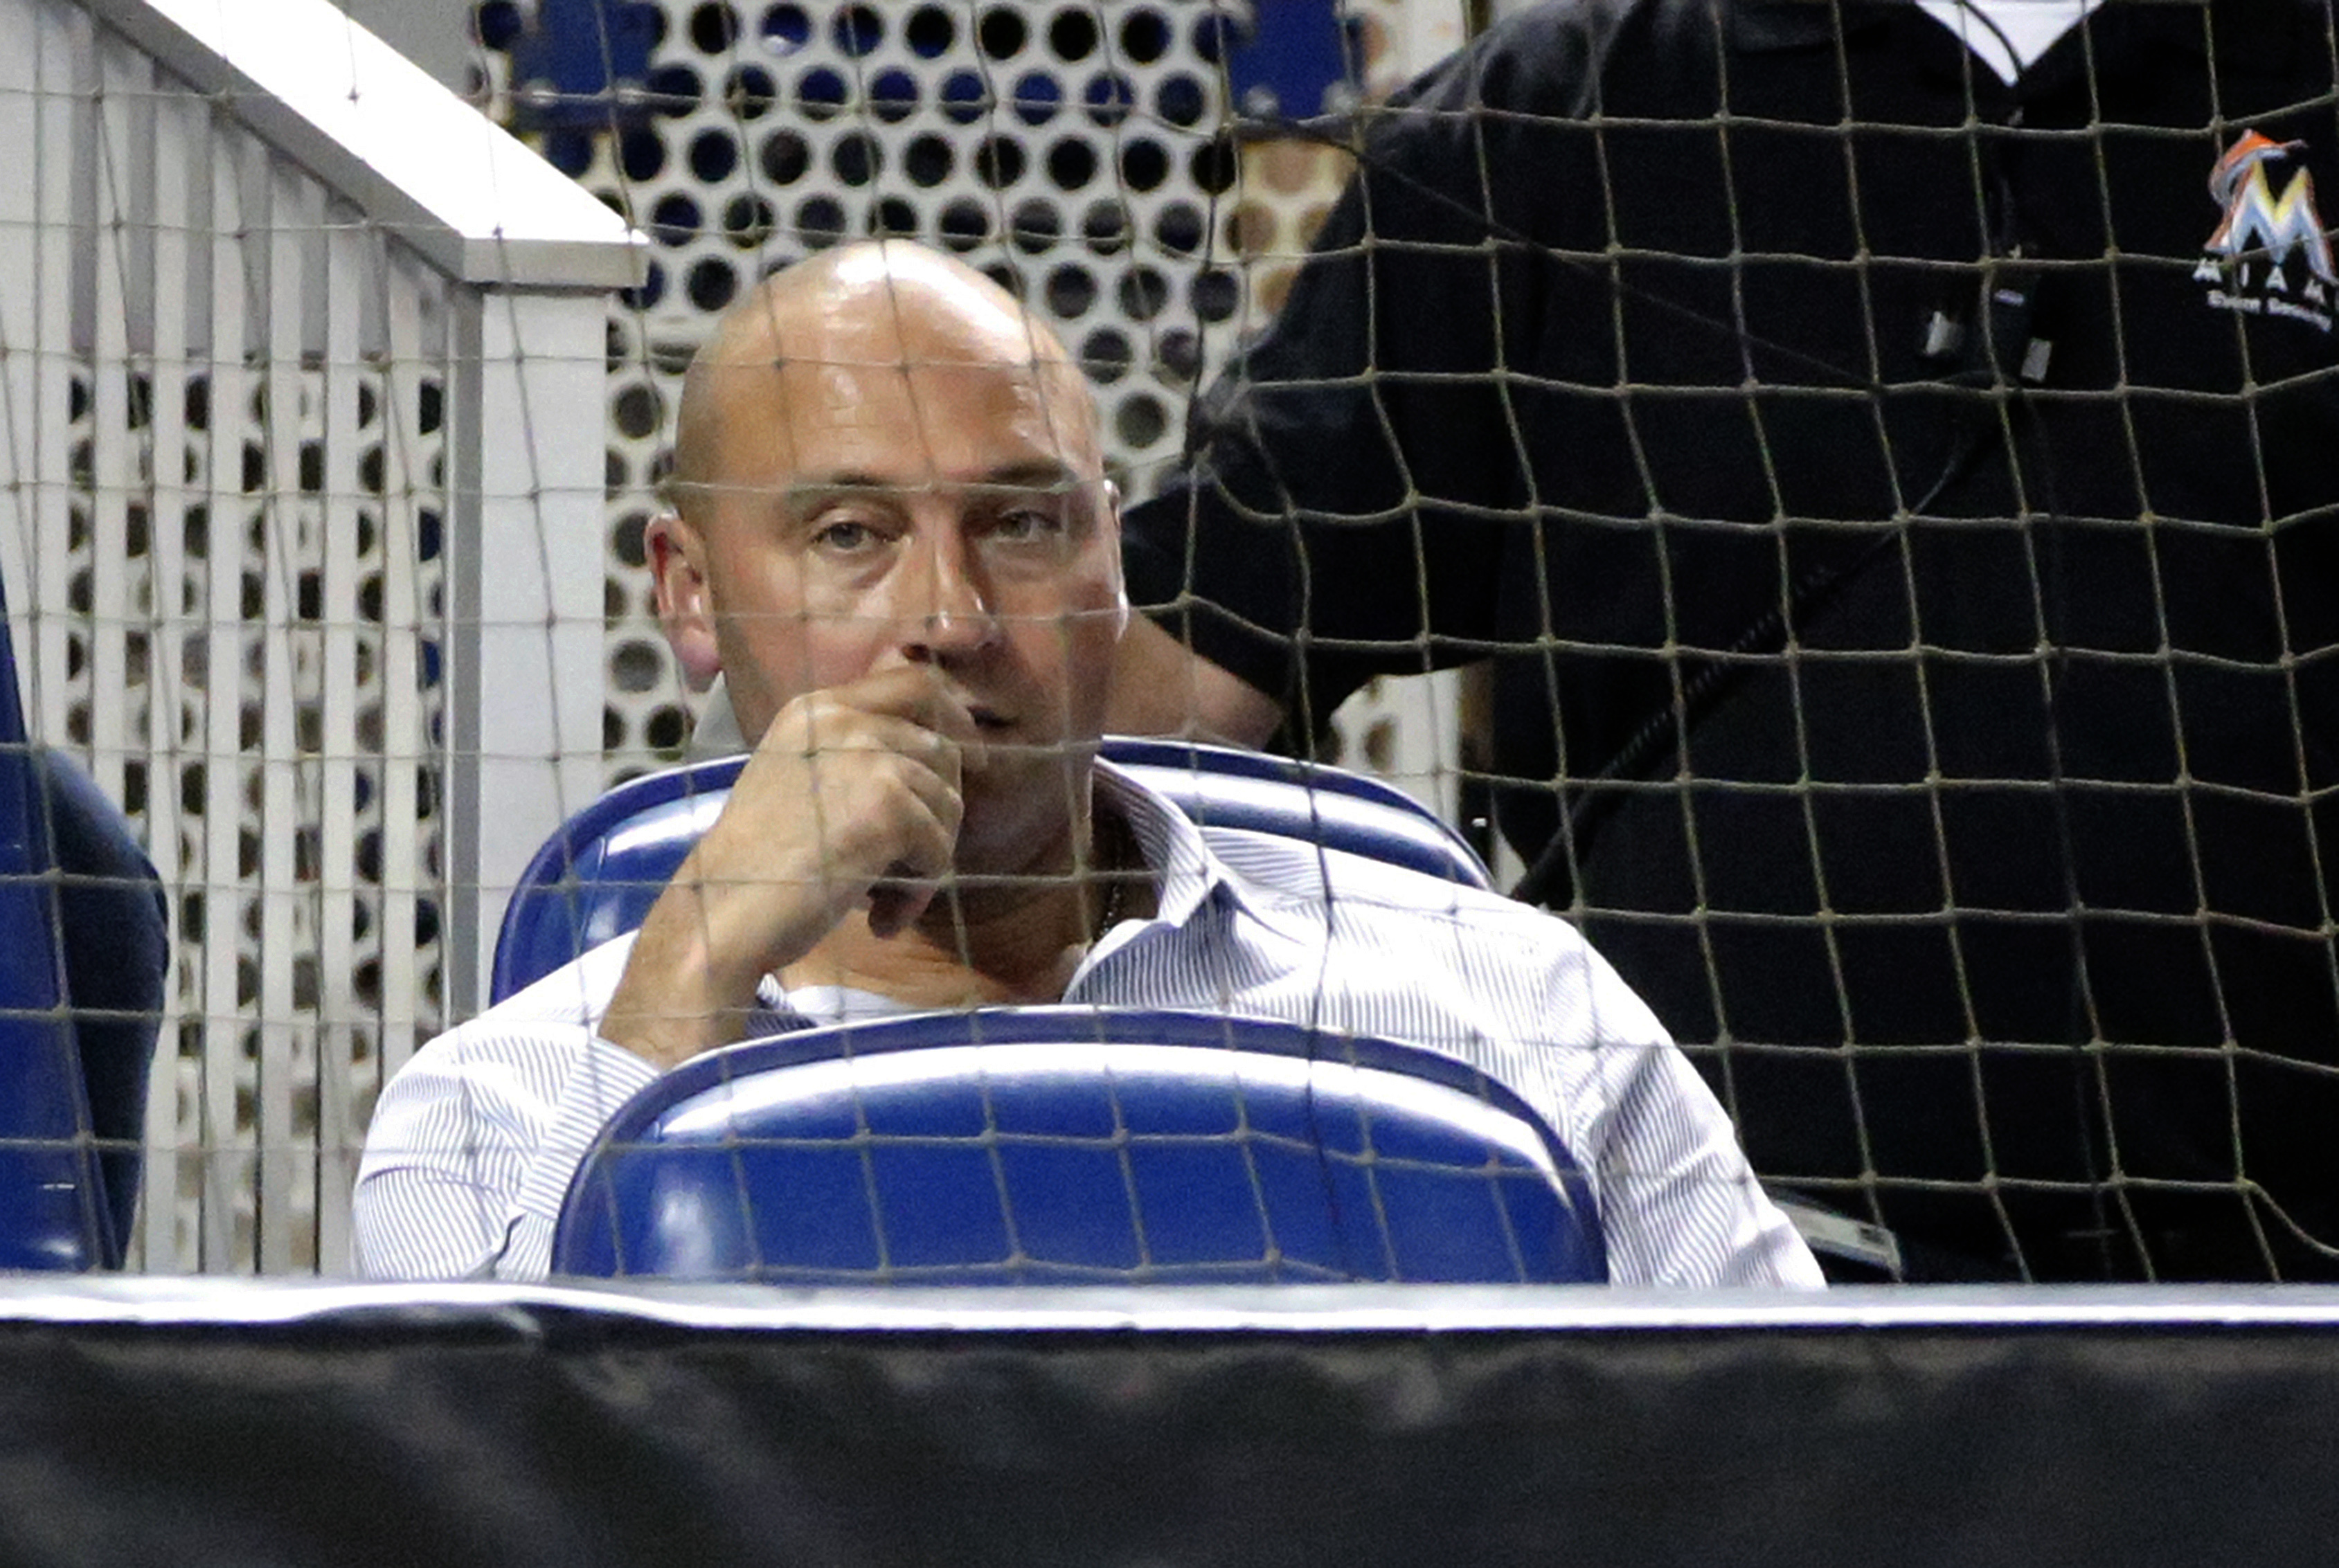 Lots of losing for Jeter in 1st year as Marlins as owner